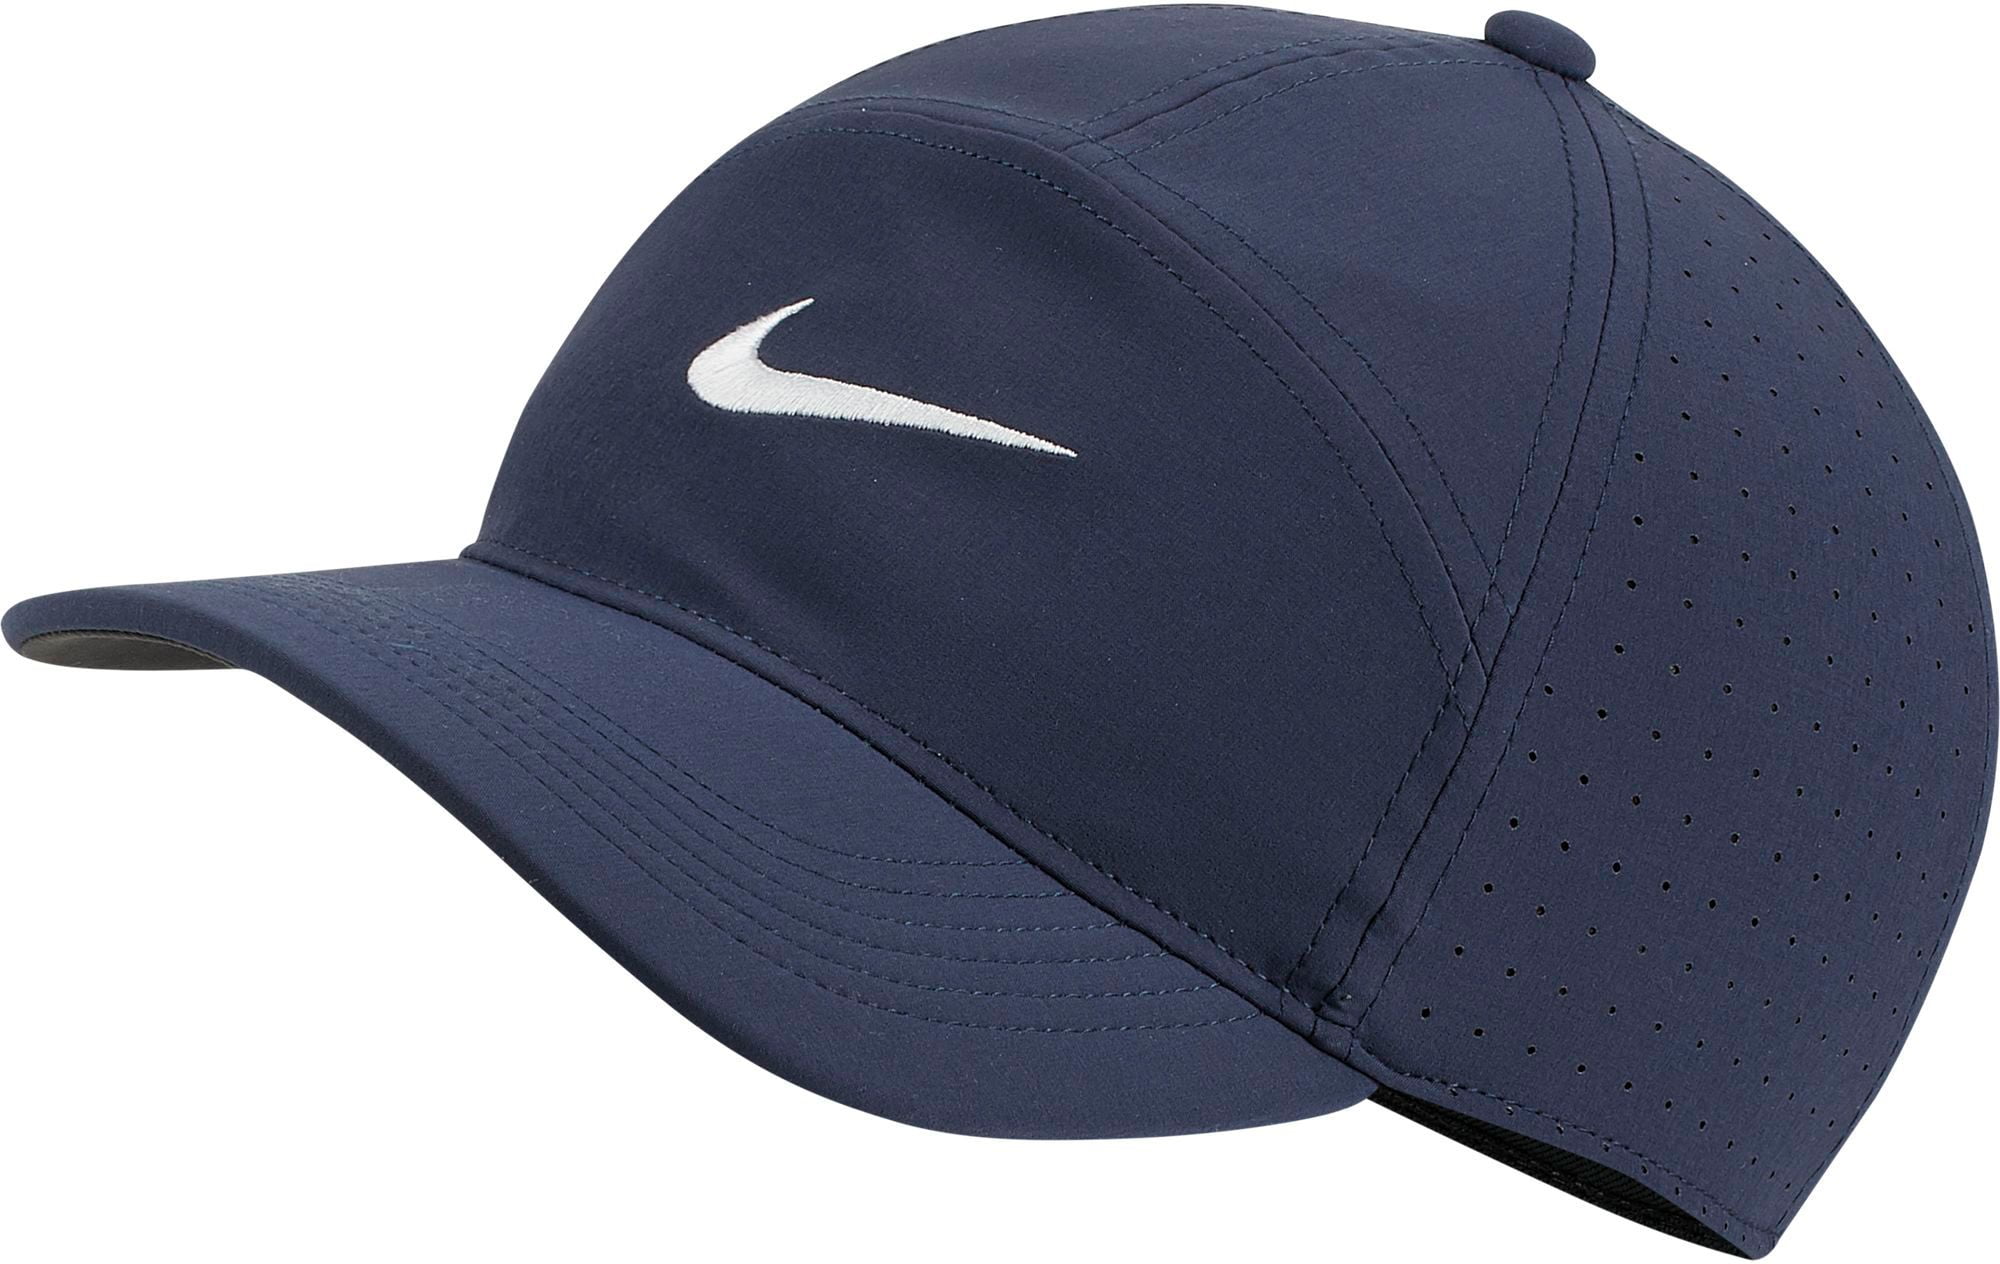 nike men's legacy 91 perforated golf hat